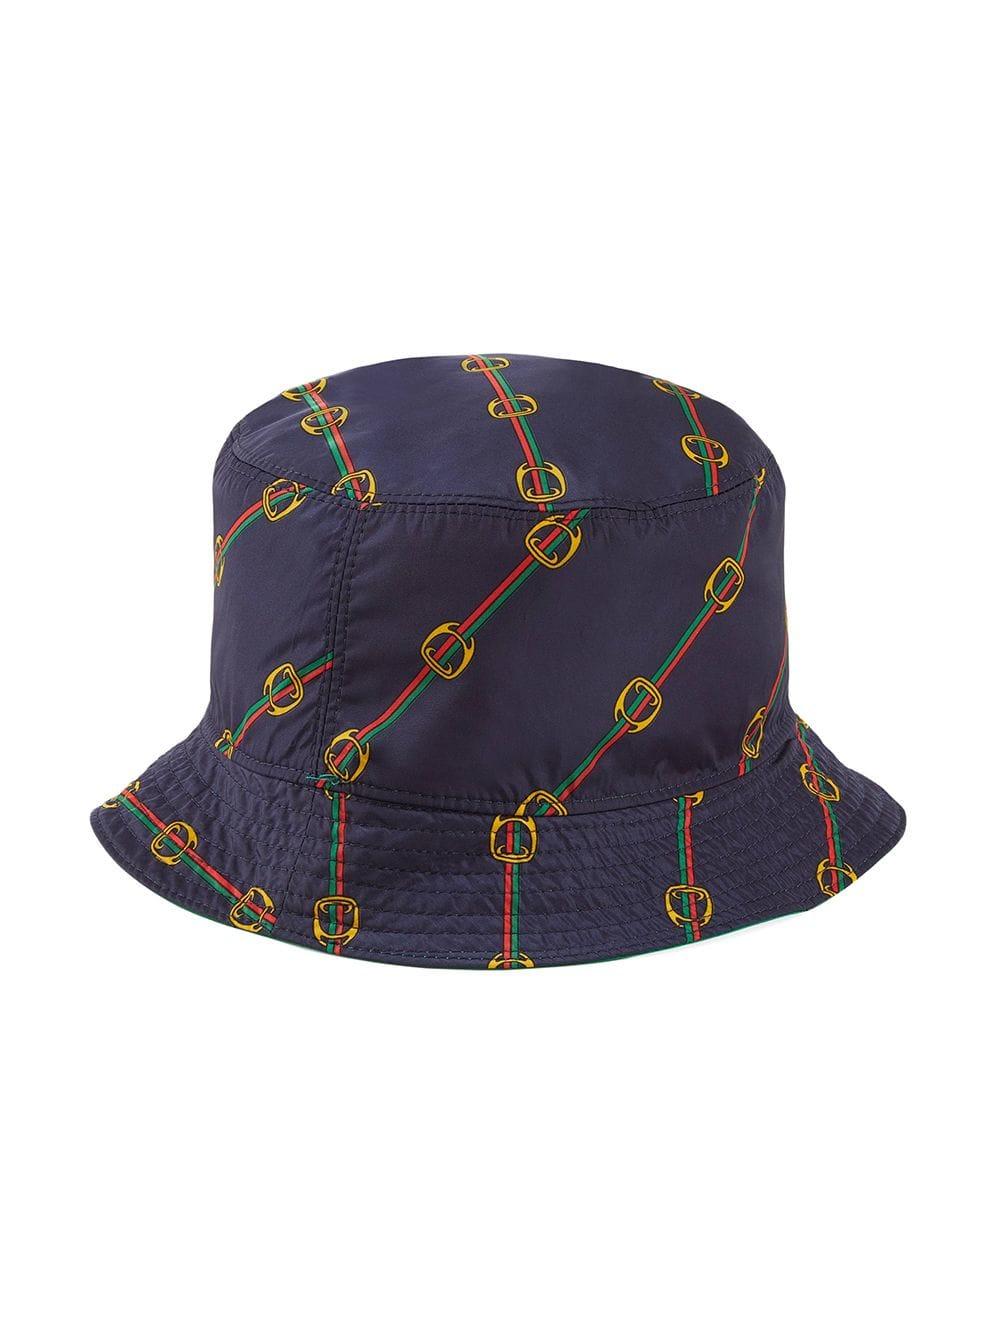 Gucci Synthetic Reversible Bucket Hat in Green for Men - Lyst